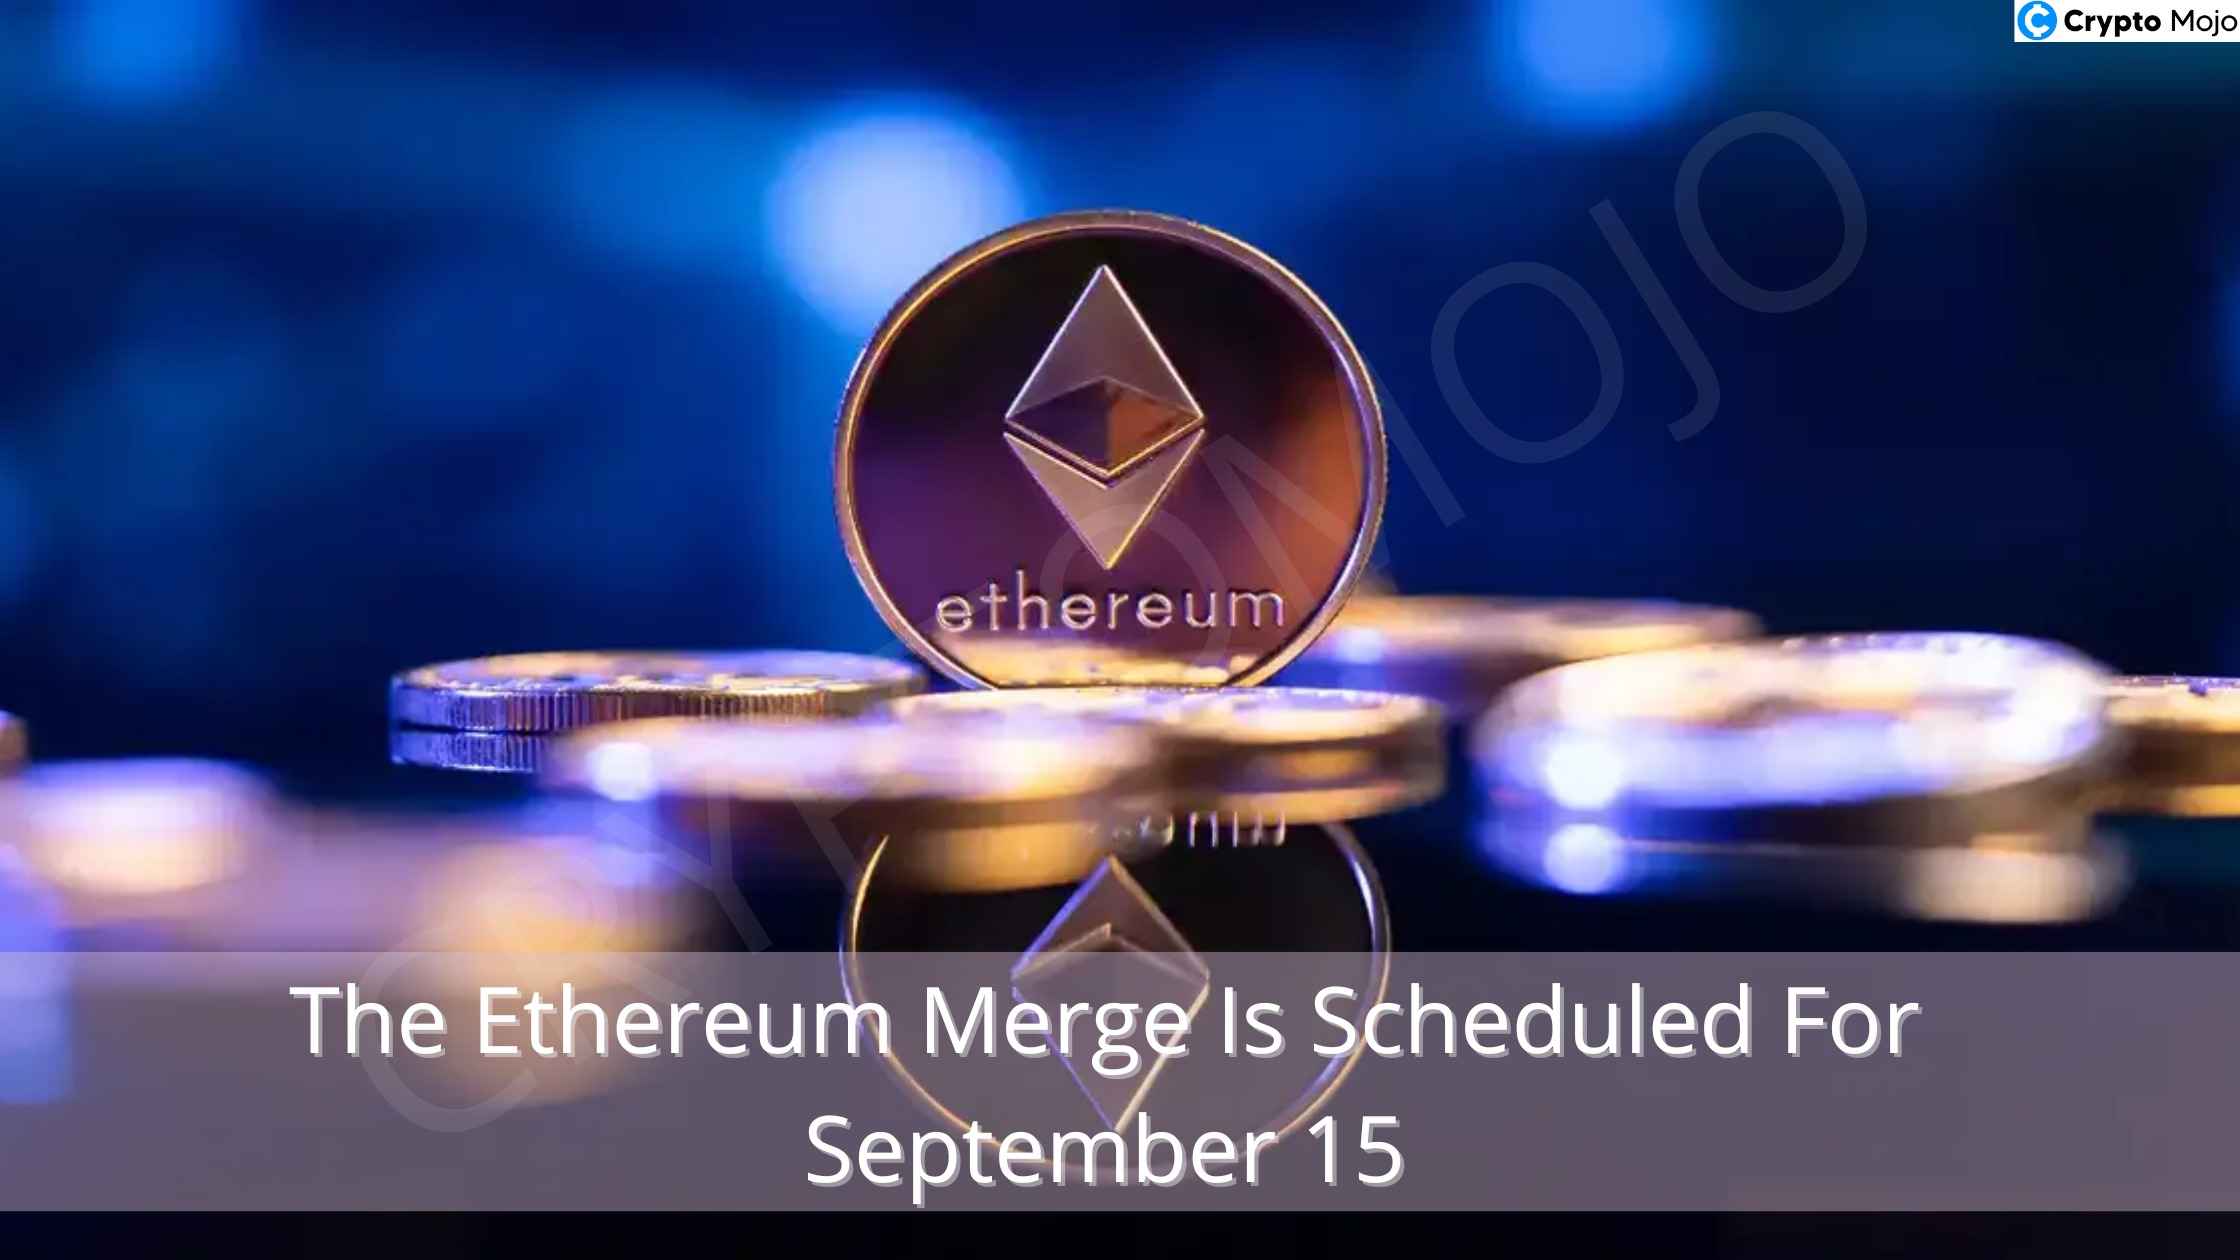 The Ethereum Merge Is Scheduled For September 15